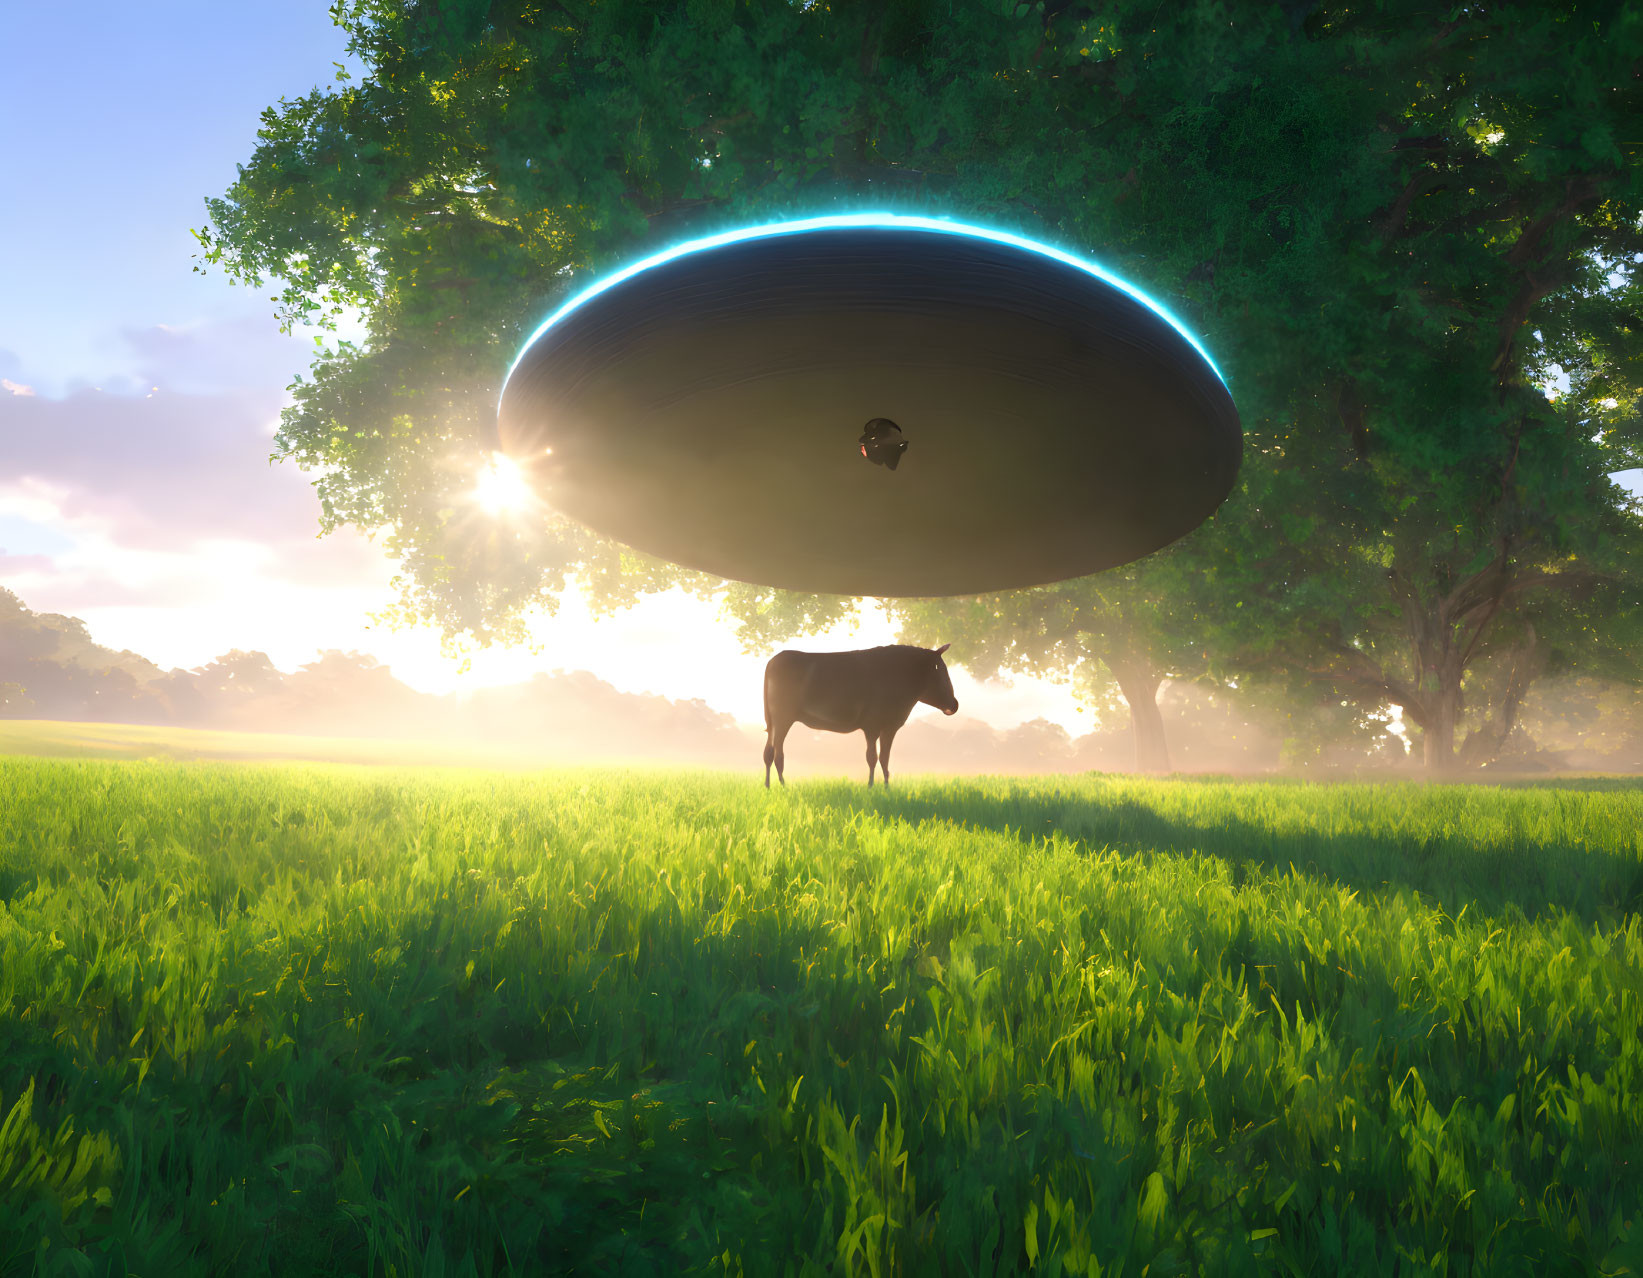 Cow in sunlit field gazes at hovering flying saucer with light beams.